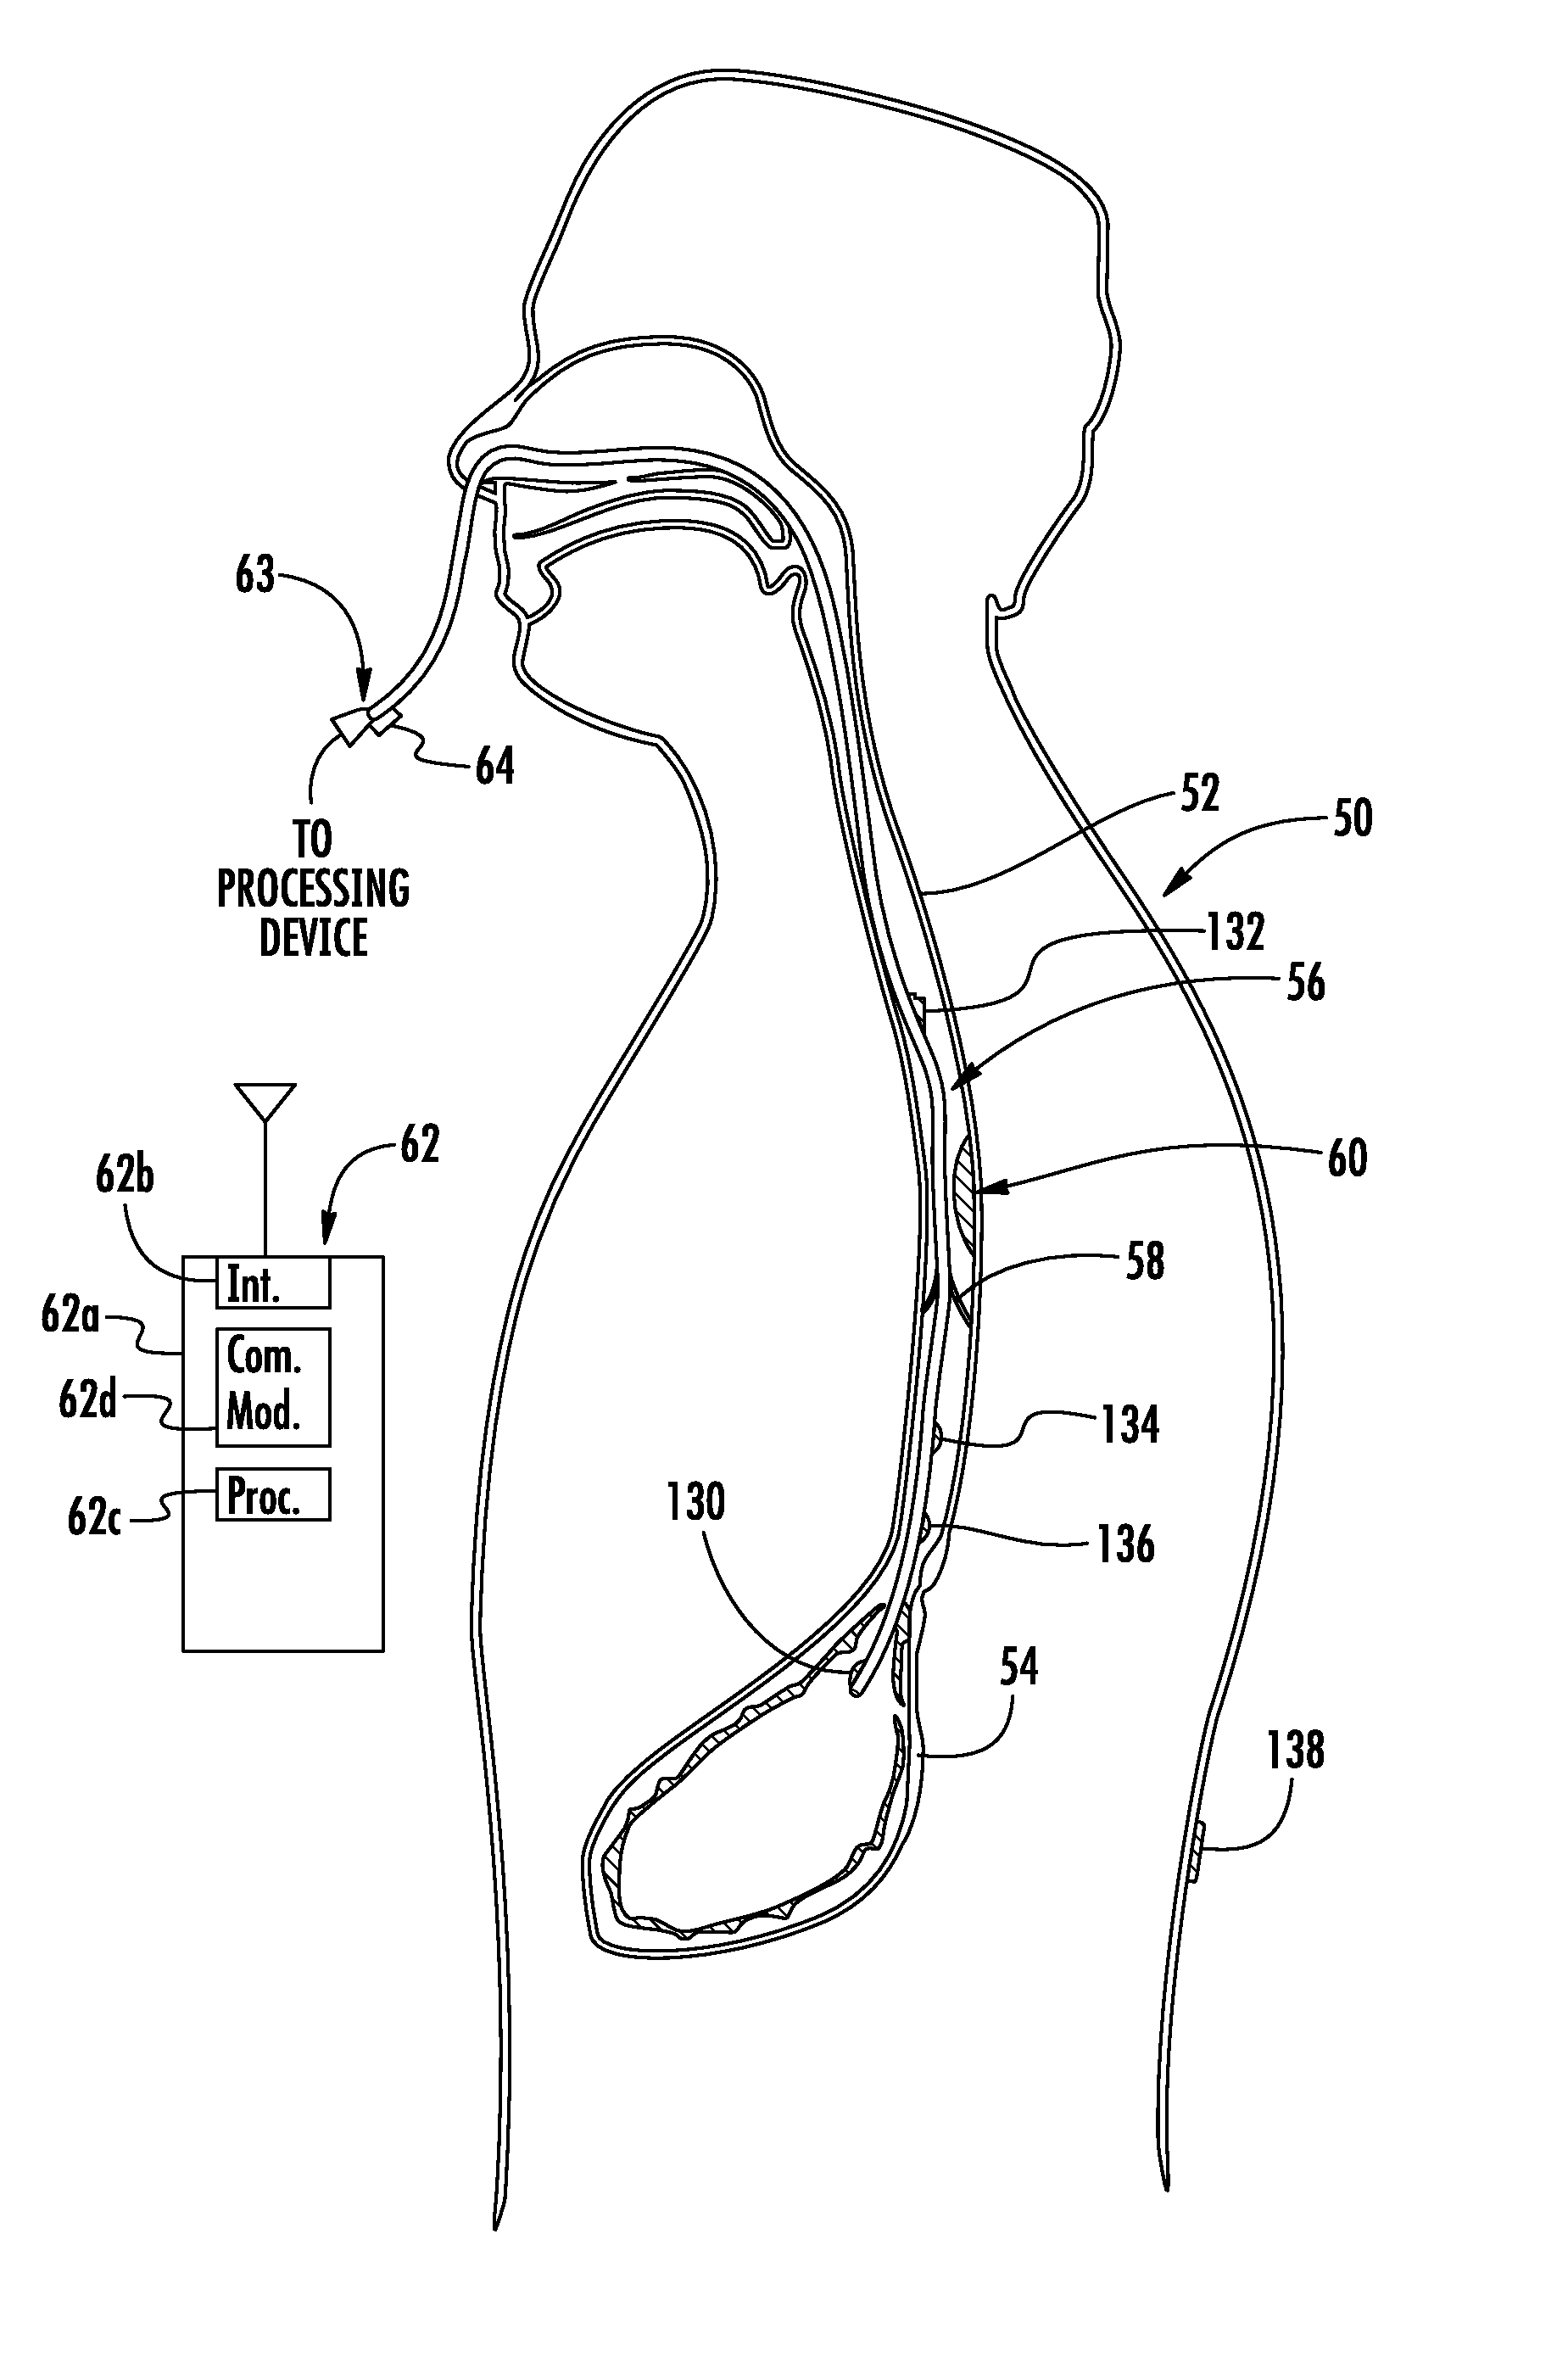 Device with passive valve to block emesis and/or reflux and associated system and method